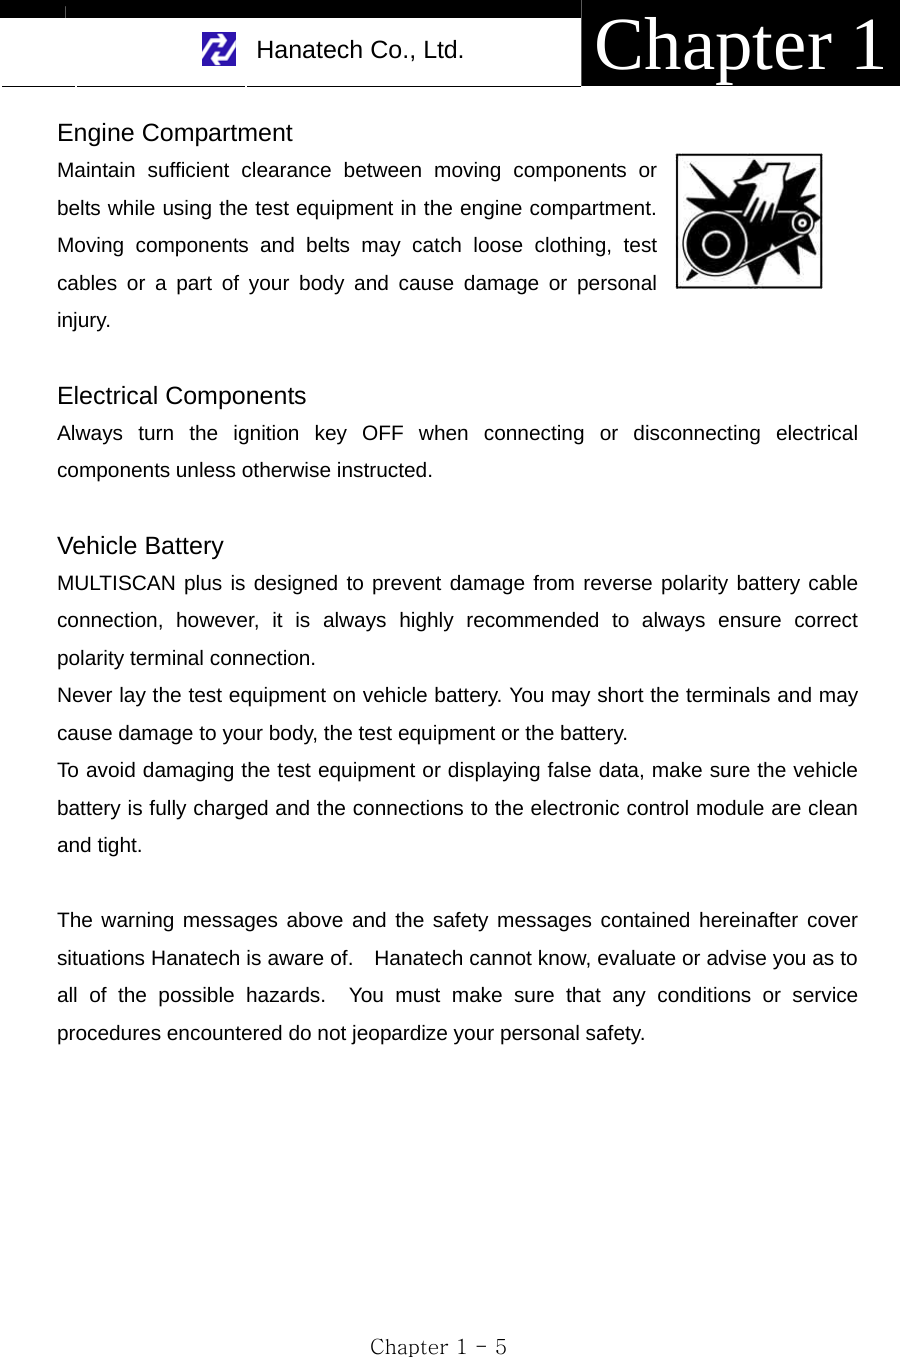     Hanatech Co., Ltd.  Chapter 1 Chapter 1 - 5 Engine Compartment Maintain sufficient clearance between moving components or belts while using the test equipment in the engine compartment.  Moving components and belts may catch loose clothing, test cables or a part of your body and cause damage or personal injury.  Electrical Components Always turn the ignition key OFF when connecting or disconnecting electrical components unless otherwise instructed.  Vehicle Battery MULTISCAN plus is designed to prevent damage from reverse polarity battery cable connection, however, it is always highly recommended to always ensure correct polarity terminal connection.     Never lay the test equipment on vehicle battery. You may short the terminals and may cause damage to your body, the test equipment or the battery. To avoid damaging the test equipment or displaying false data, make sure the vehicle battery is fully charged and the connections to the electronic control module are clean and tight.  The warning messages above and the safety messages contained hereinafter cover situations Hanatech is aware of.    Hanatech cannot know, evaluate or advise you as to all of the possible hazards.  You must make sure that any conditions or service procedures encountered do not jeopardize your personal safety.        